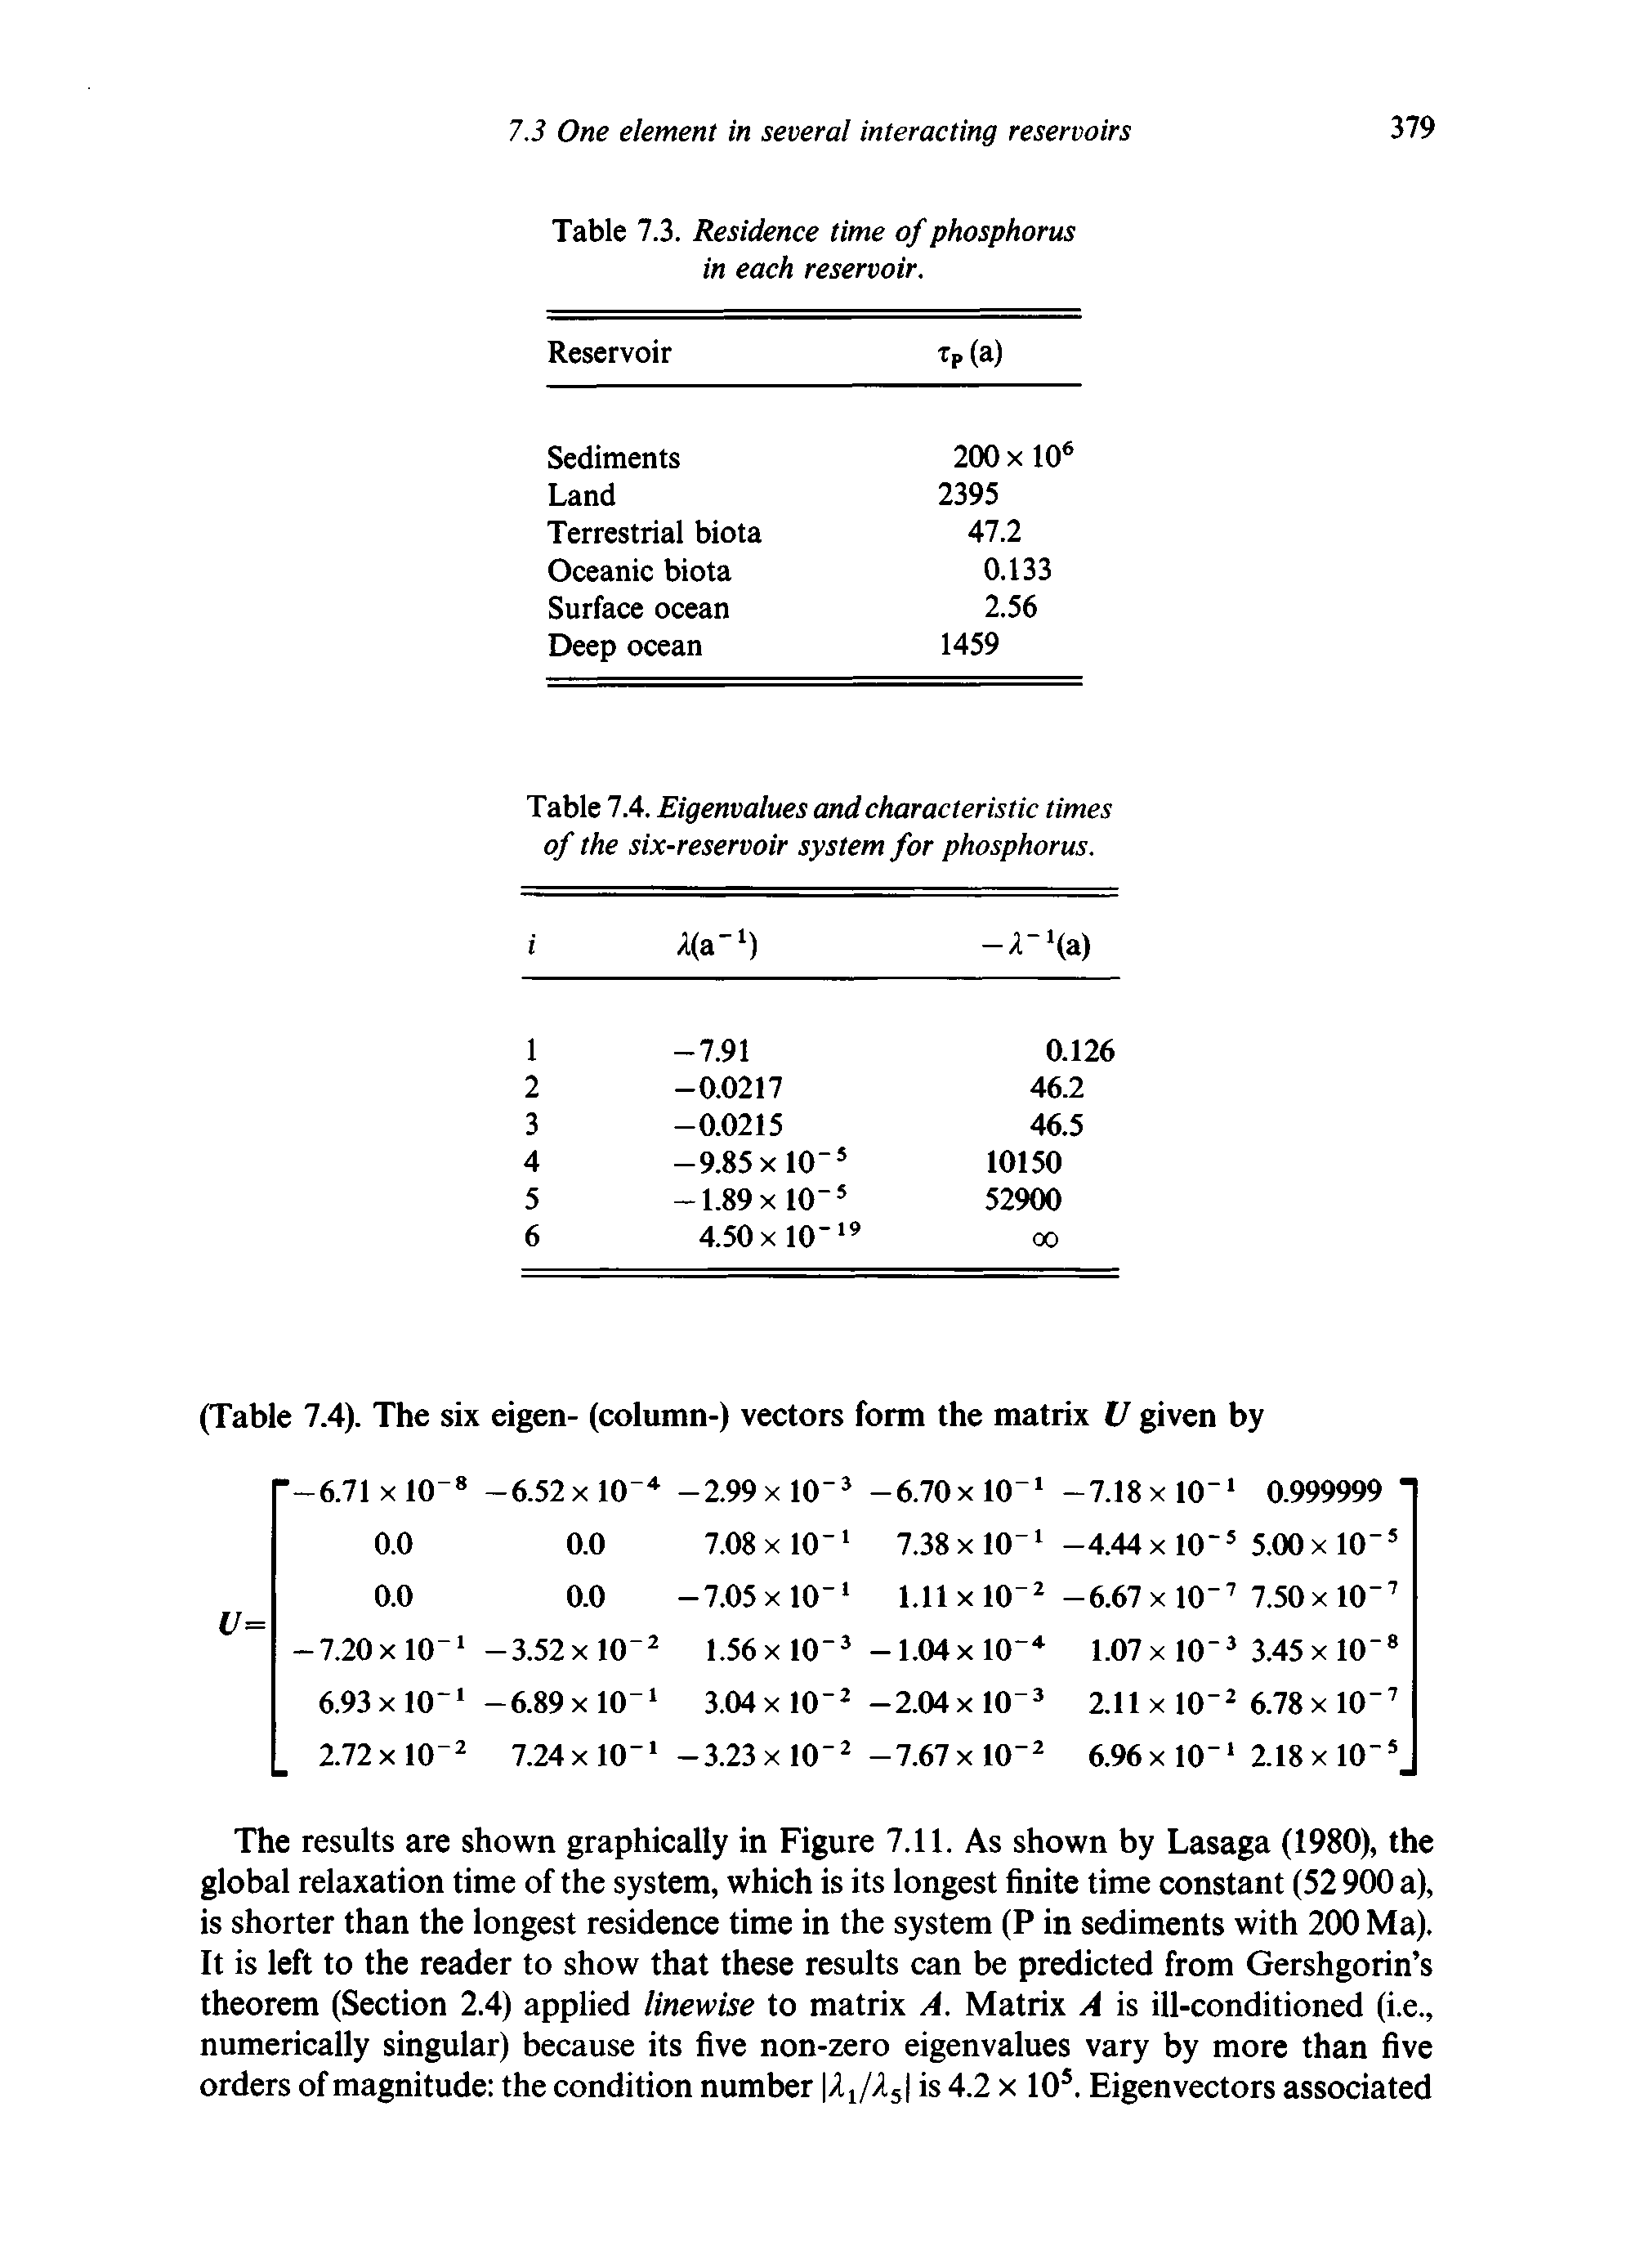 Table 7.4. Eigenvalues and characteristic times of the six-reservoir system for phosphorus.